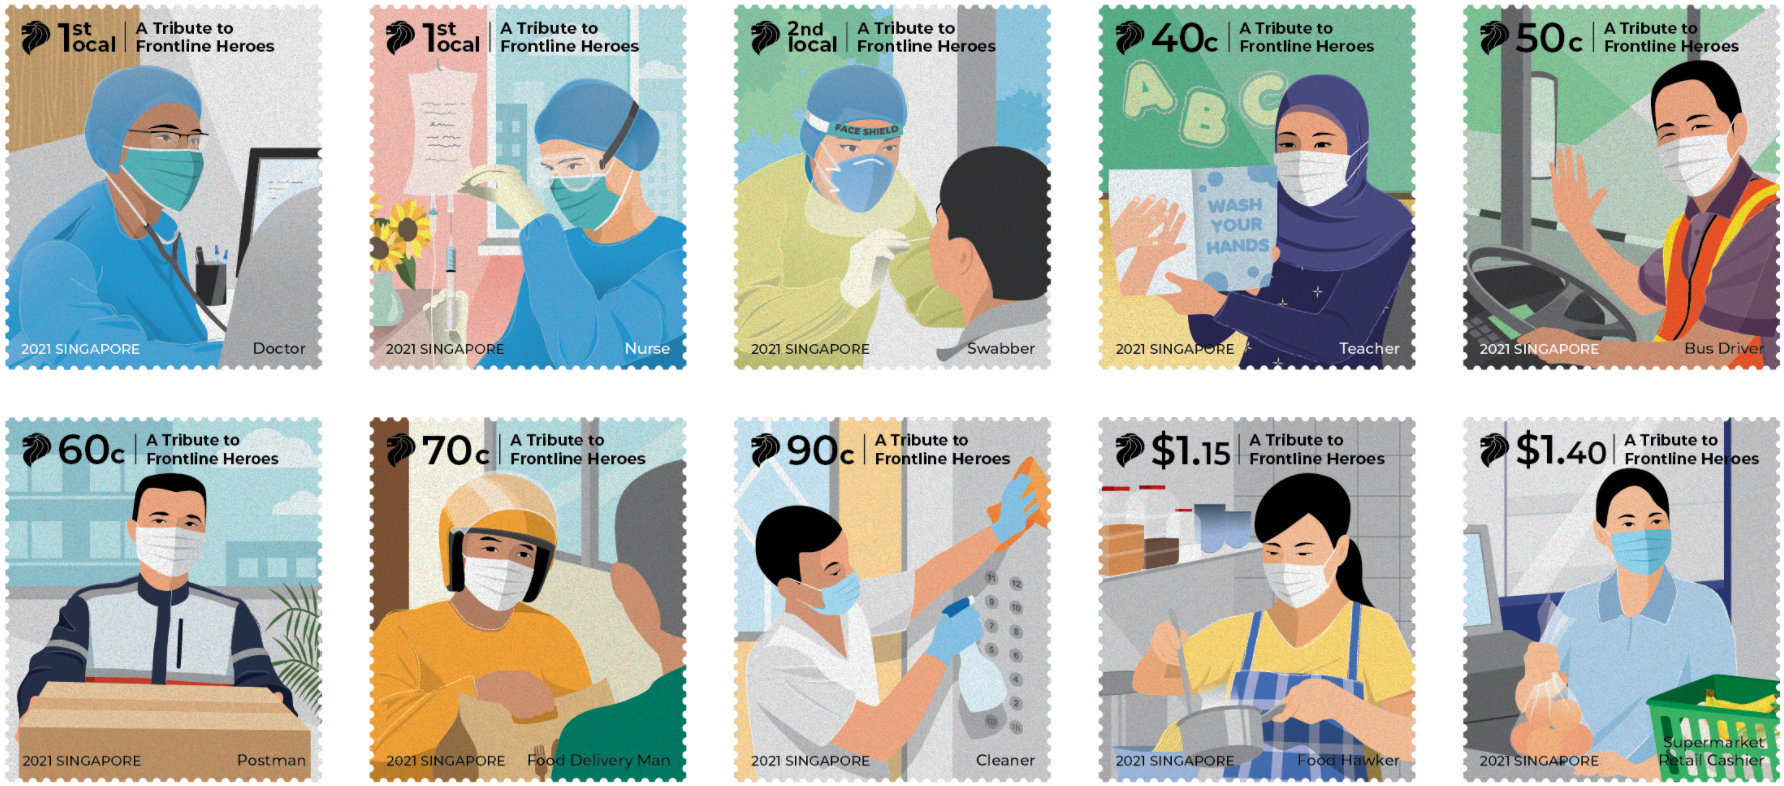 SingPost issues stamps in tribute to Singapore’s frontline heroes this National Day